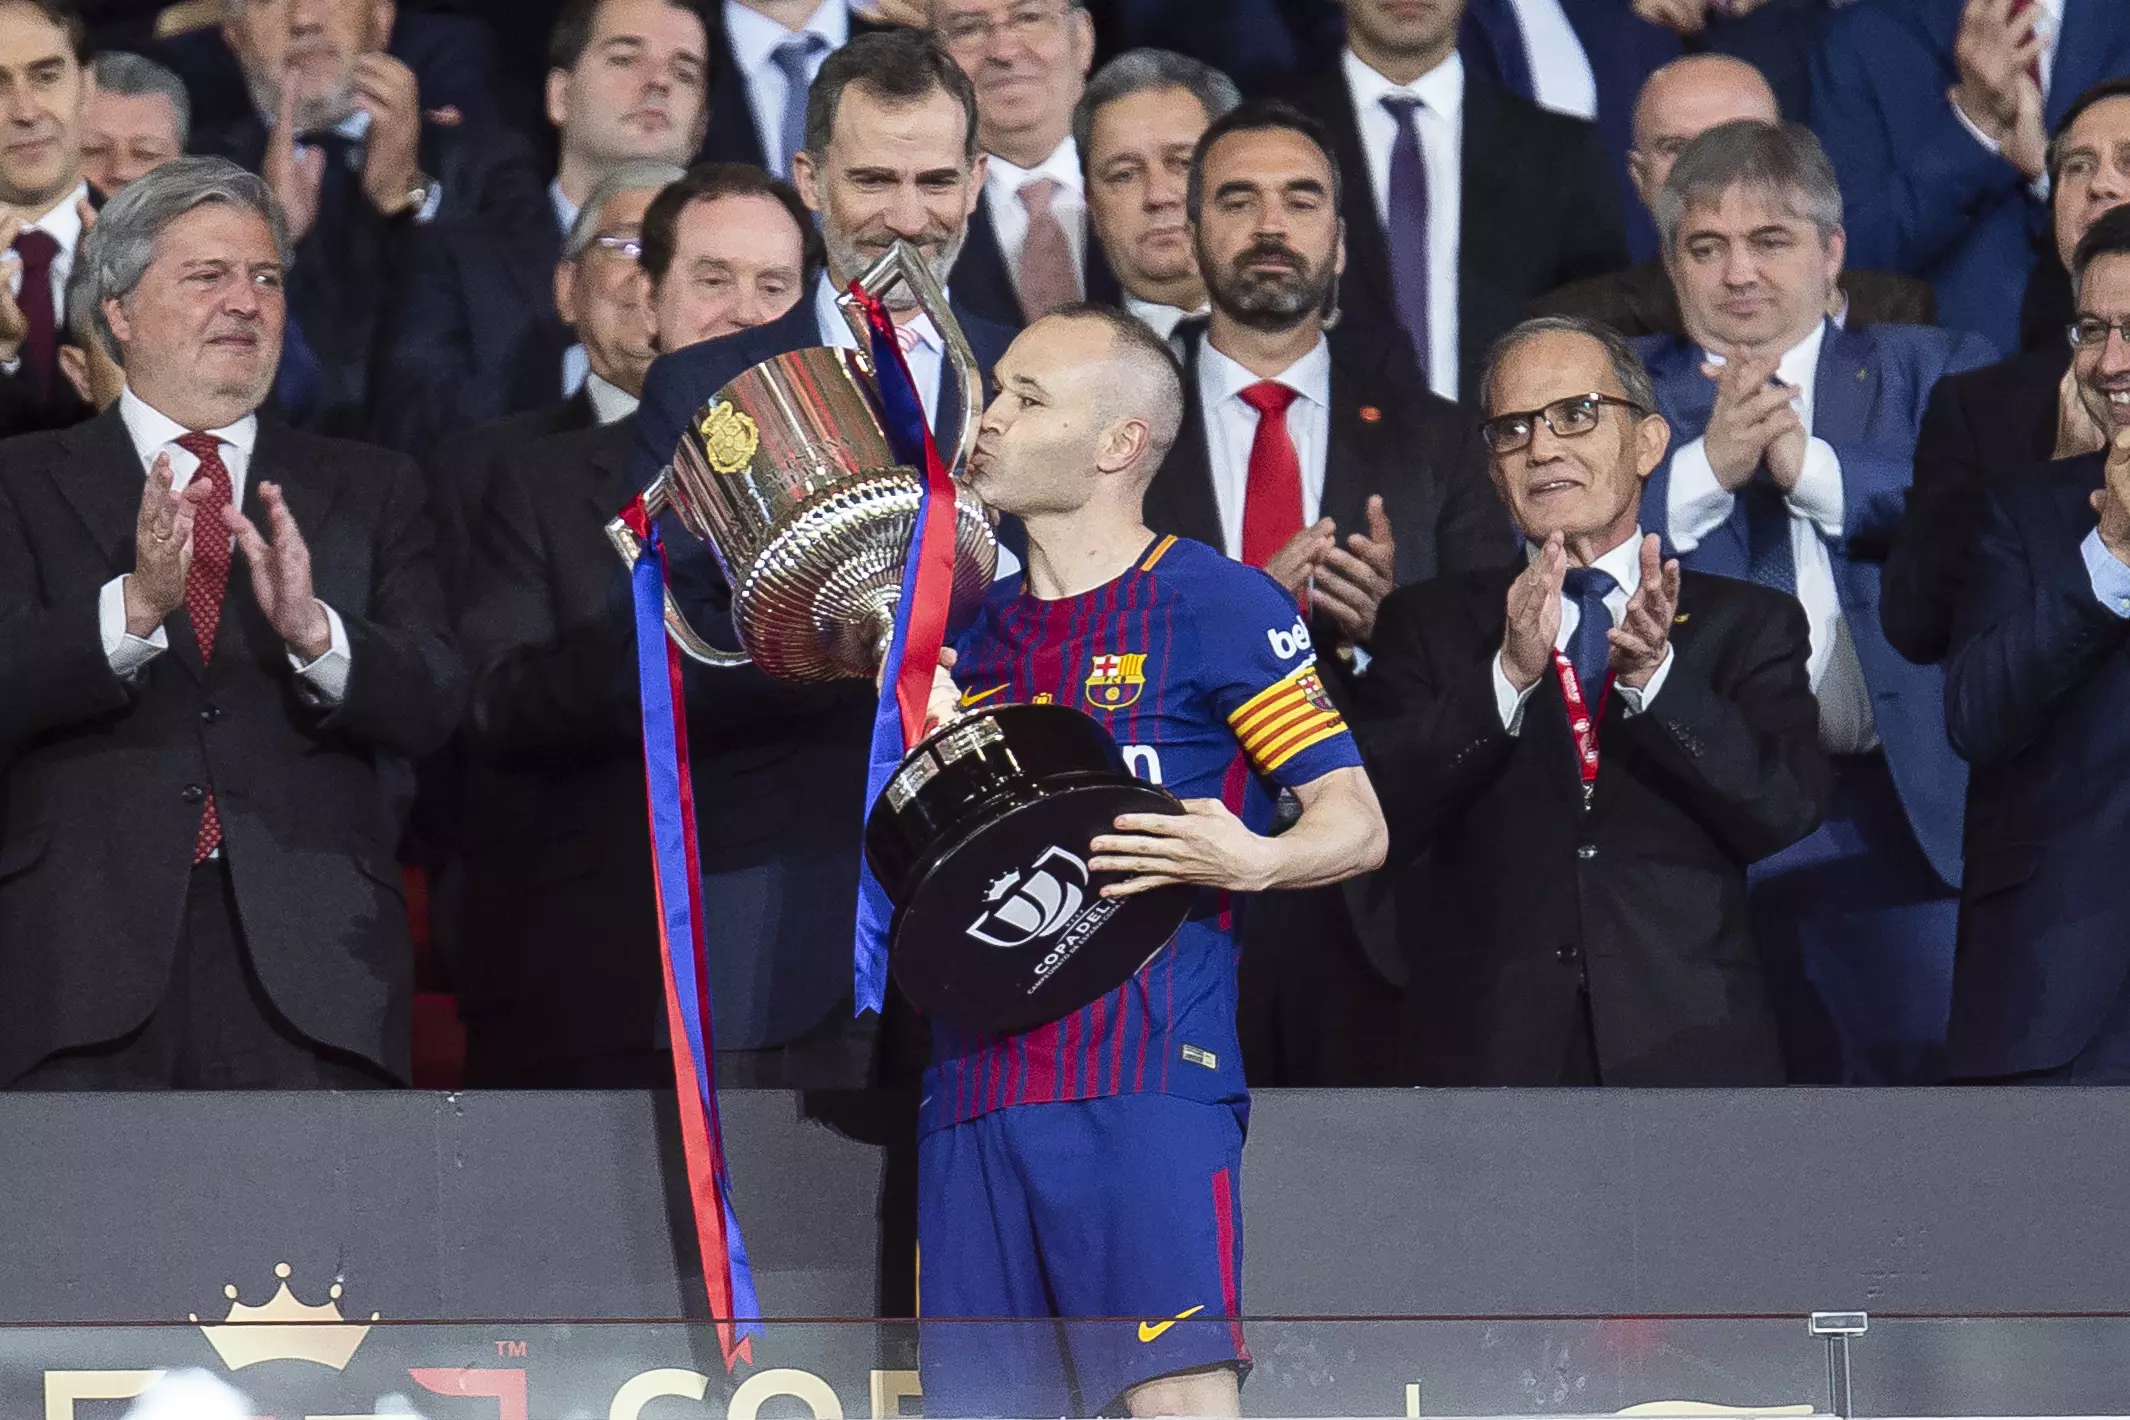 Iniesta plants a kiss on the Copa del Rey. Image: PA